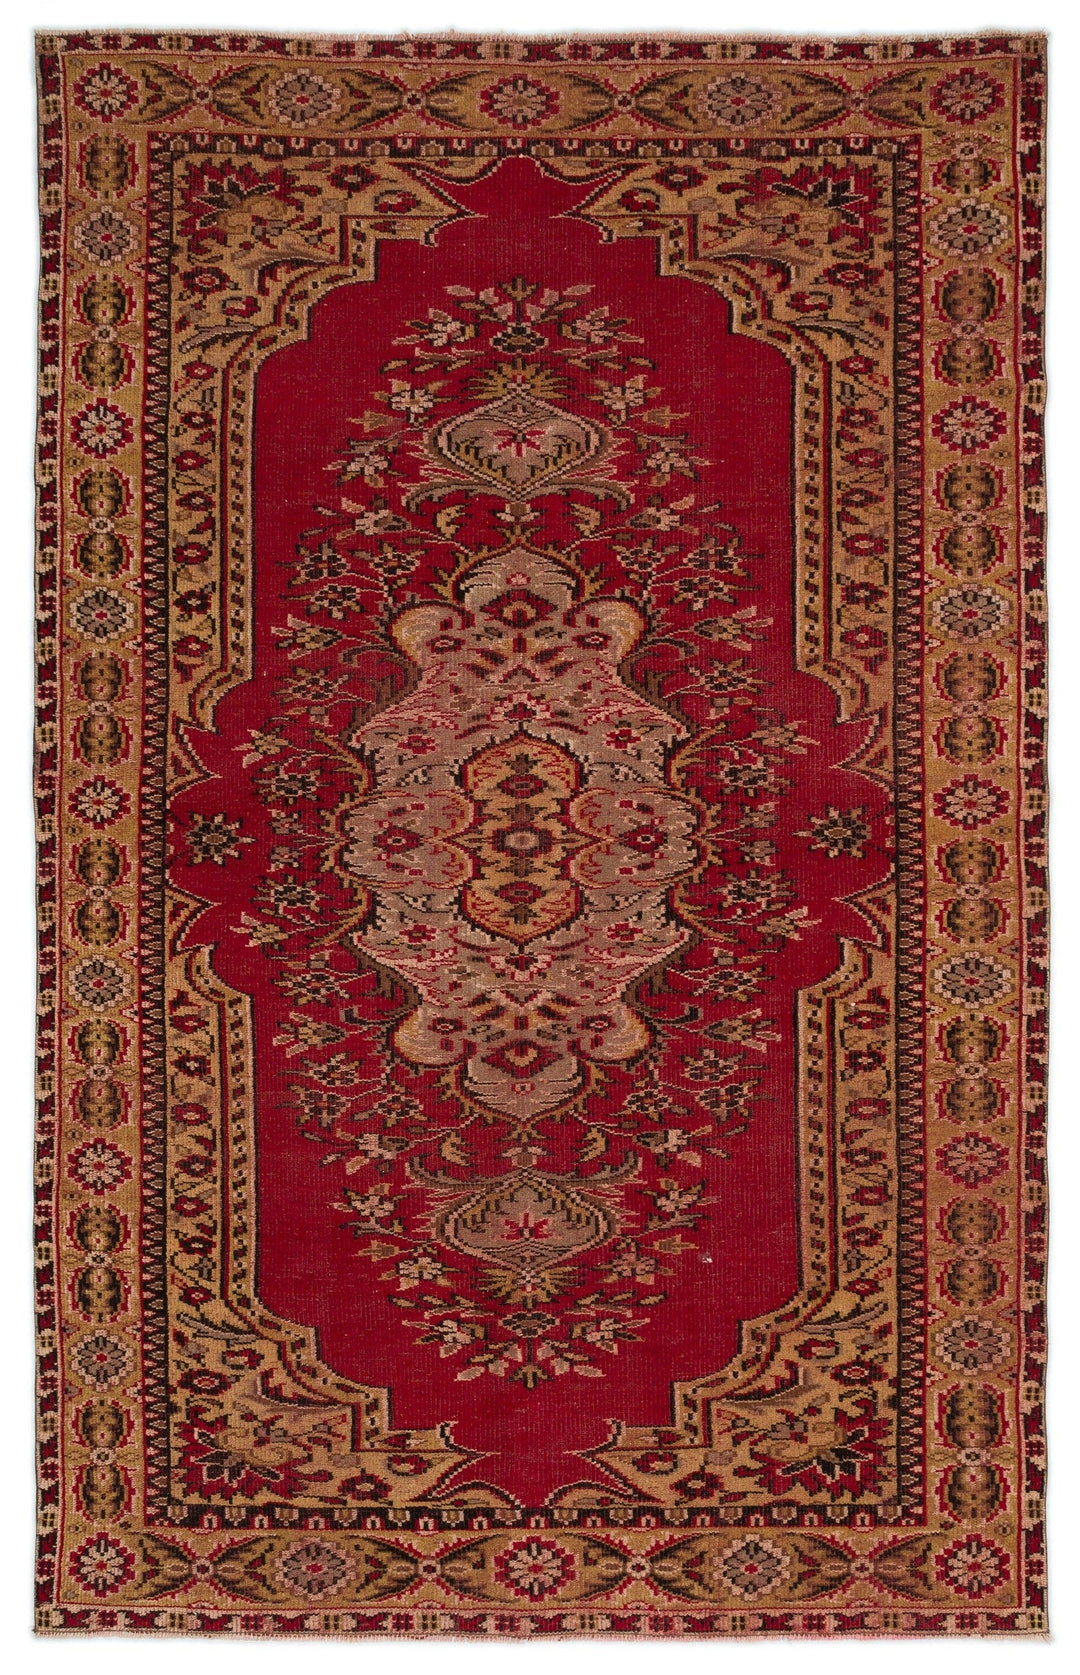 Athens Red Tumbled Wool Hand Woven Carpet 165 x 263